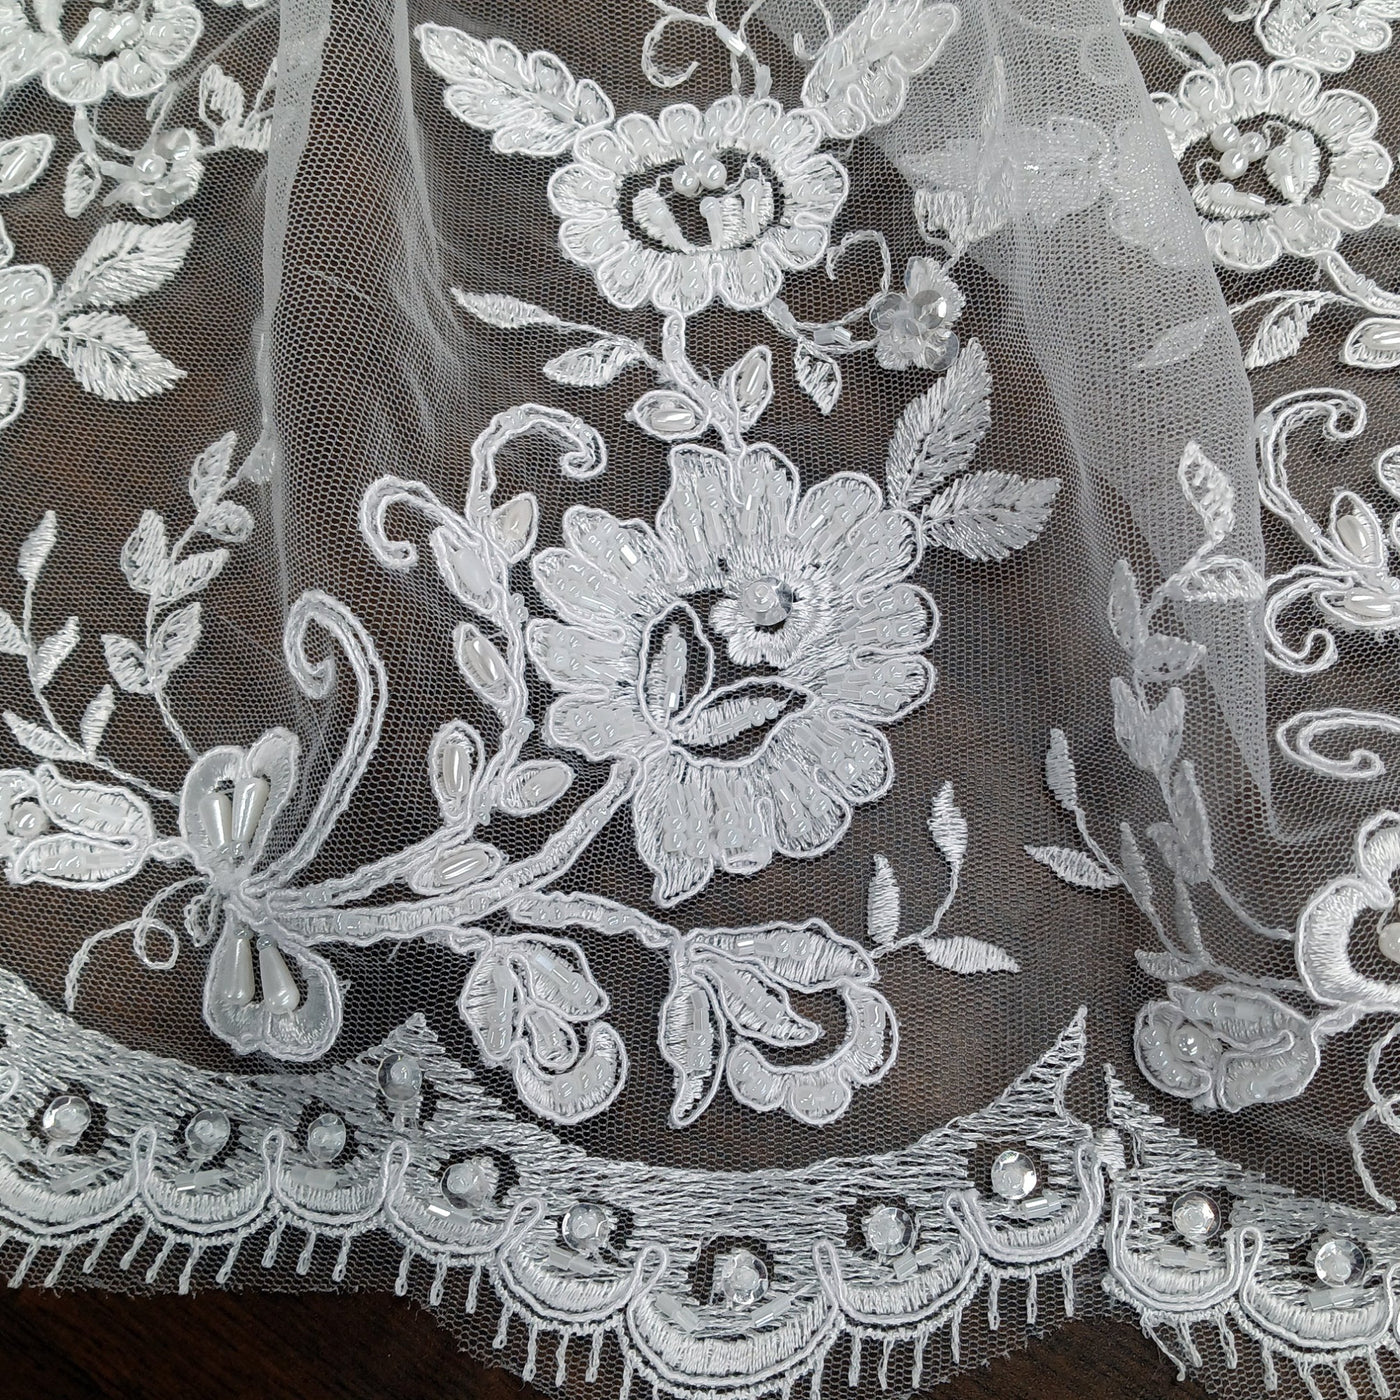 Corded & Beaded Bridal Lace Fabric Embroidered on 100% Polyester Net Mesh. Lace USA